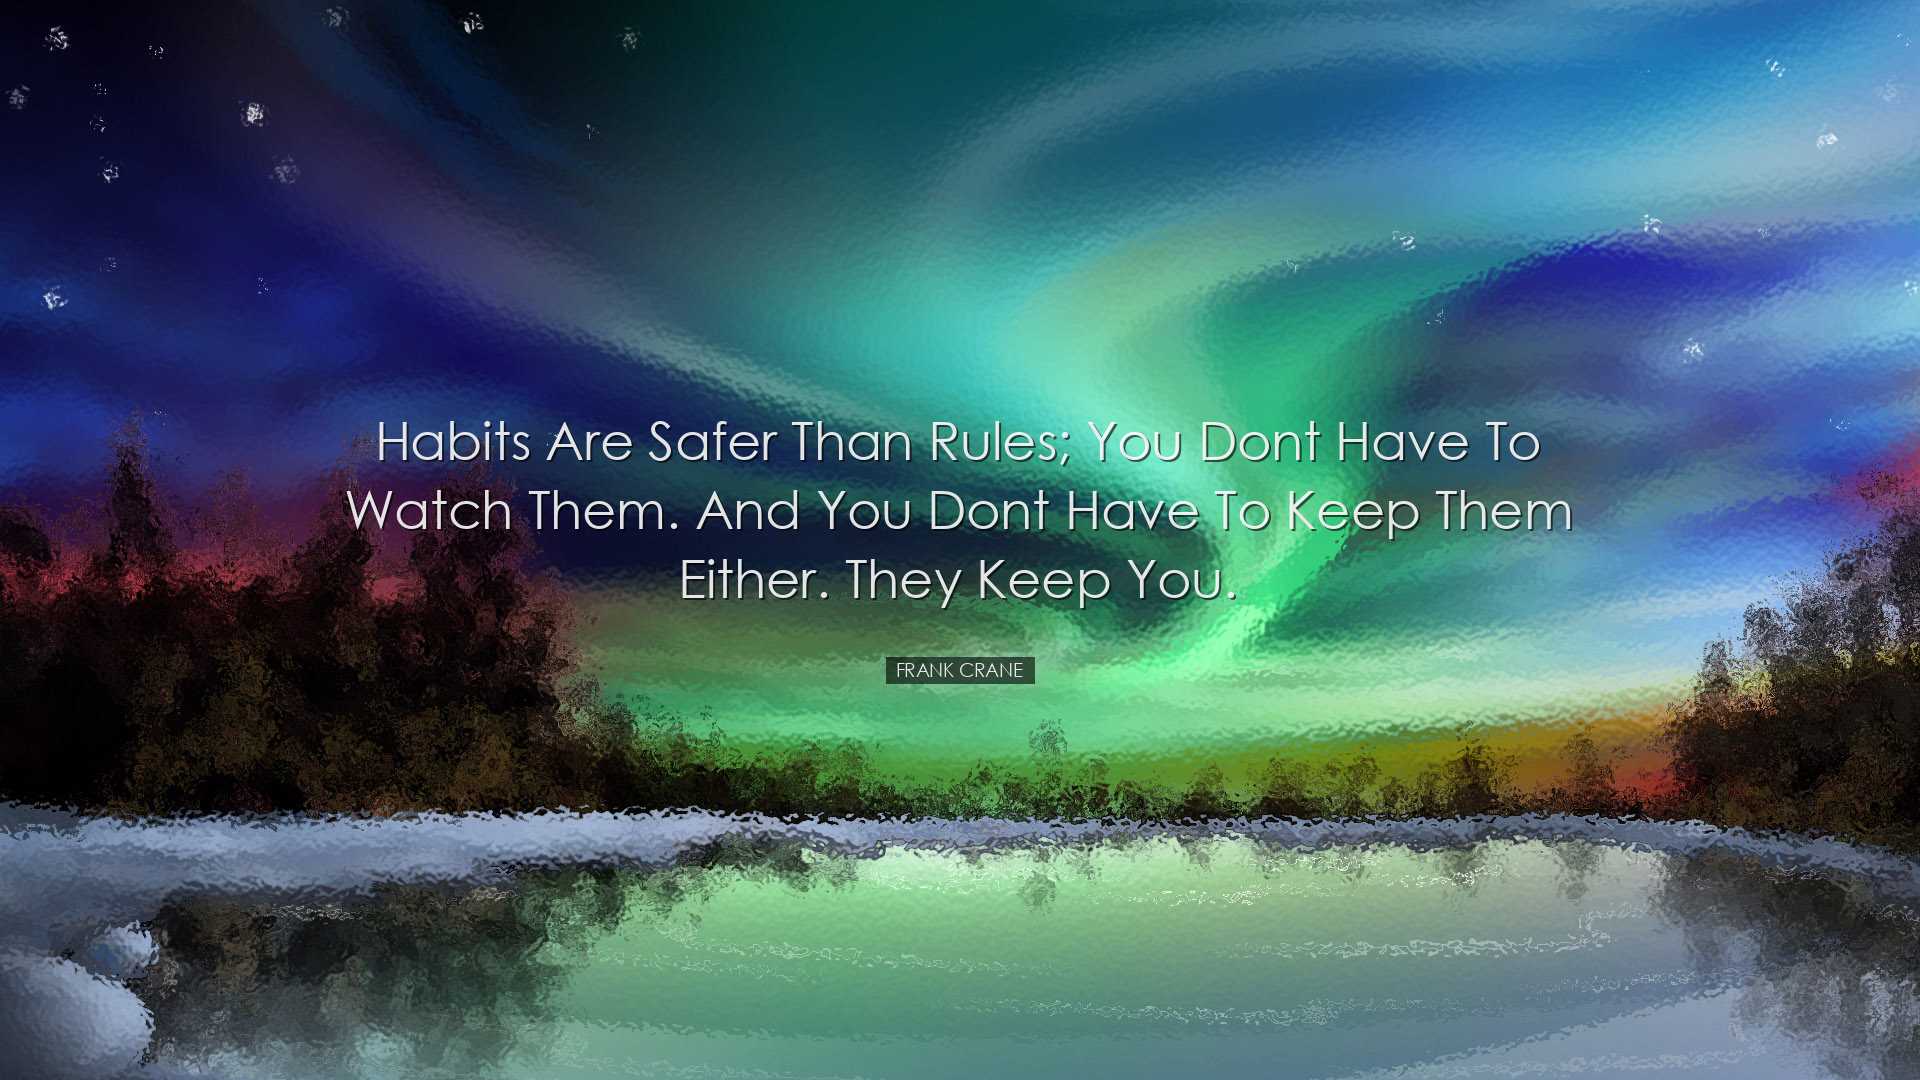 Habits are safer than rules; you dont have to watch them. And you